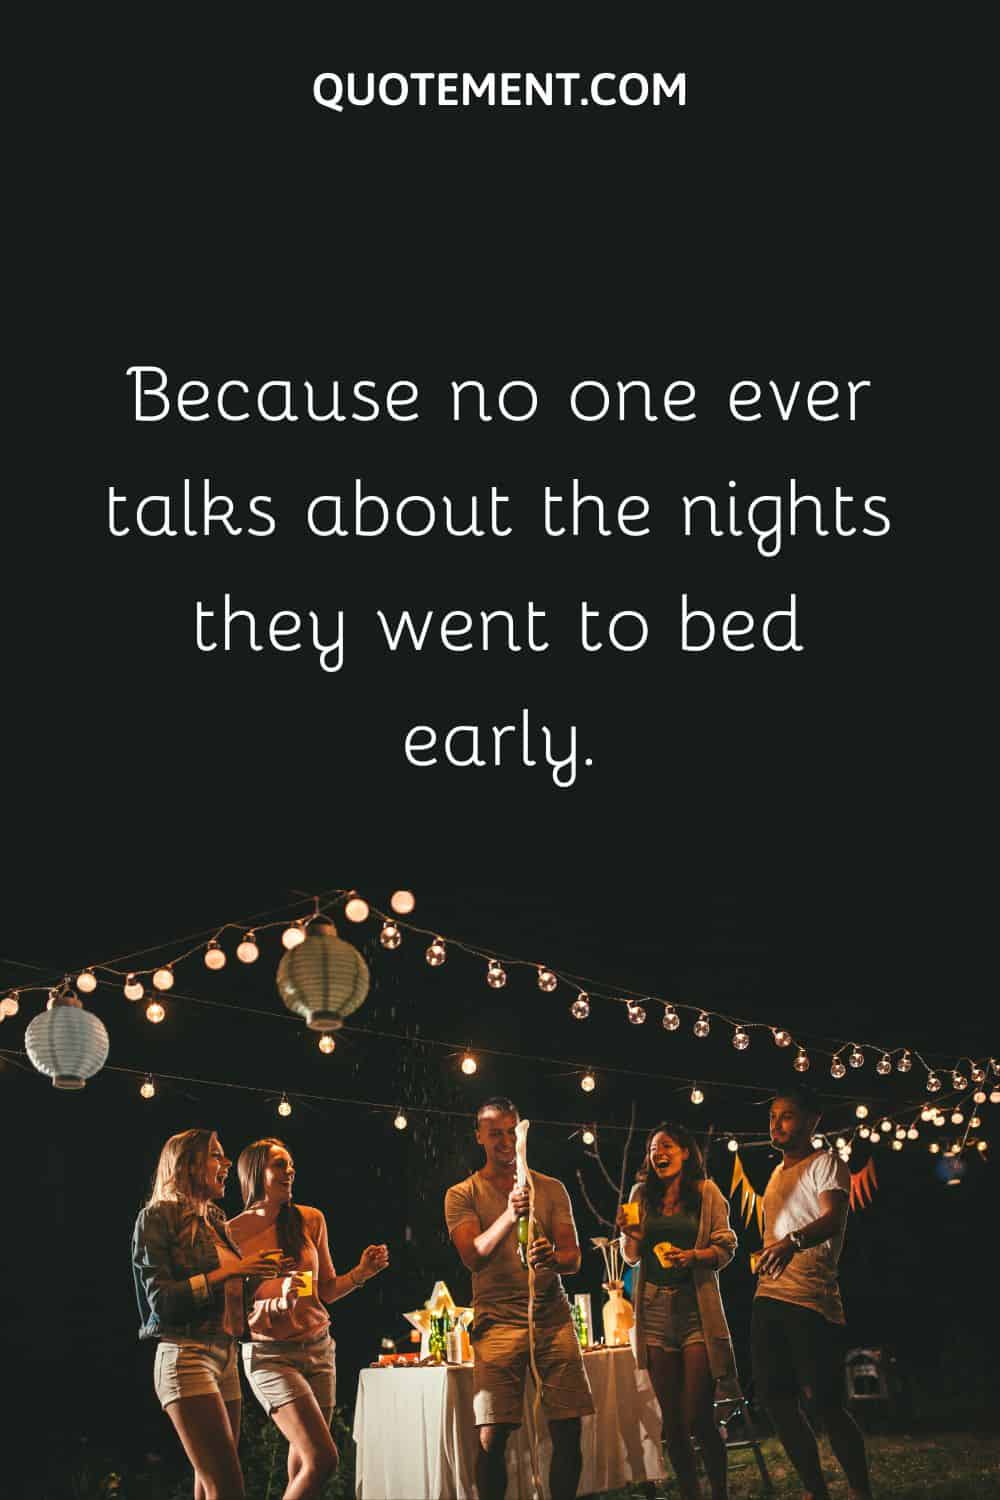 Because no one ever talks about the nights they went to bed early